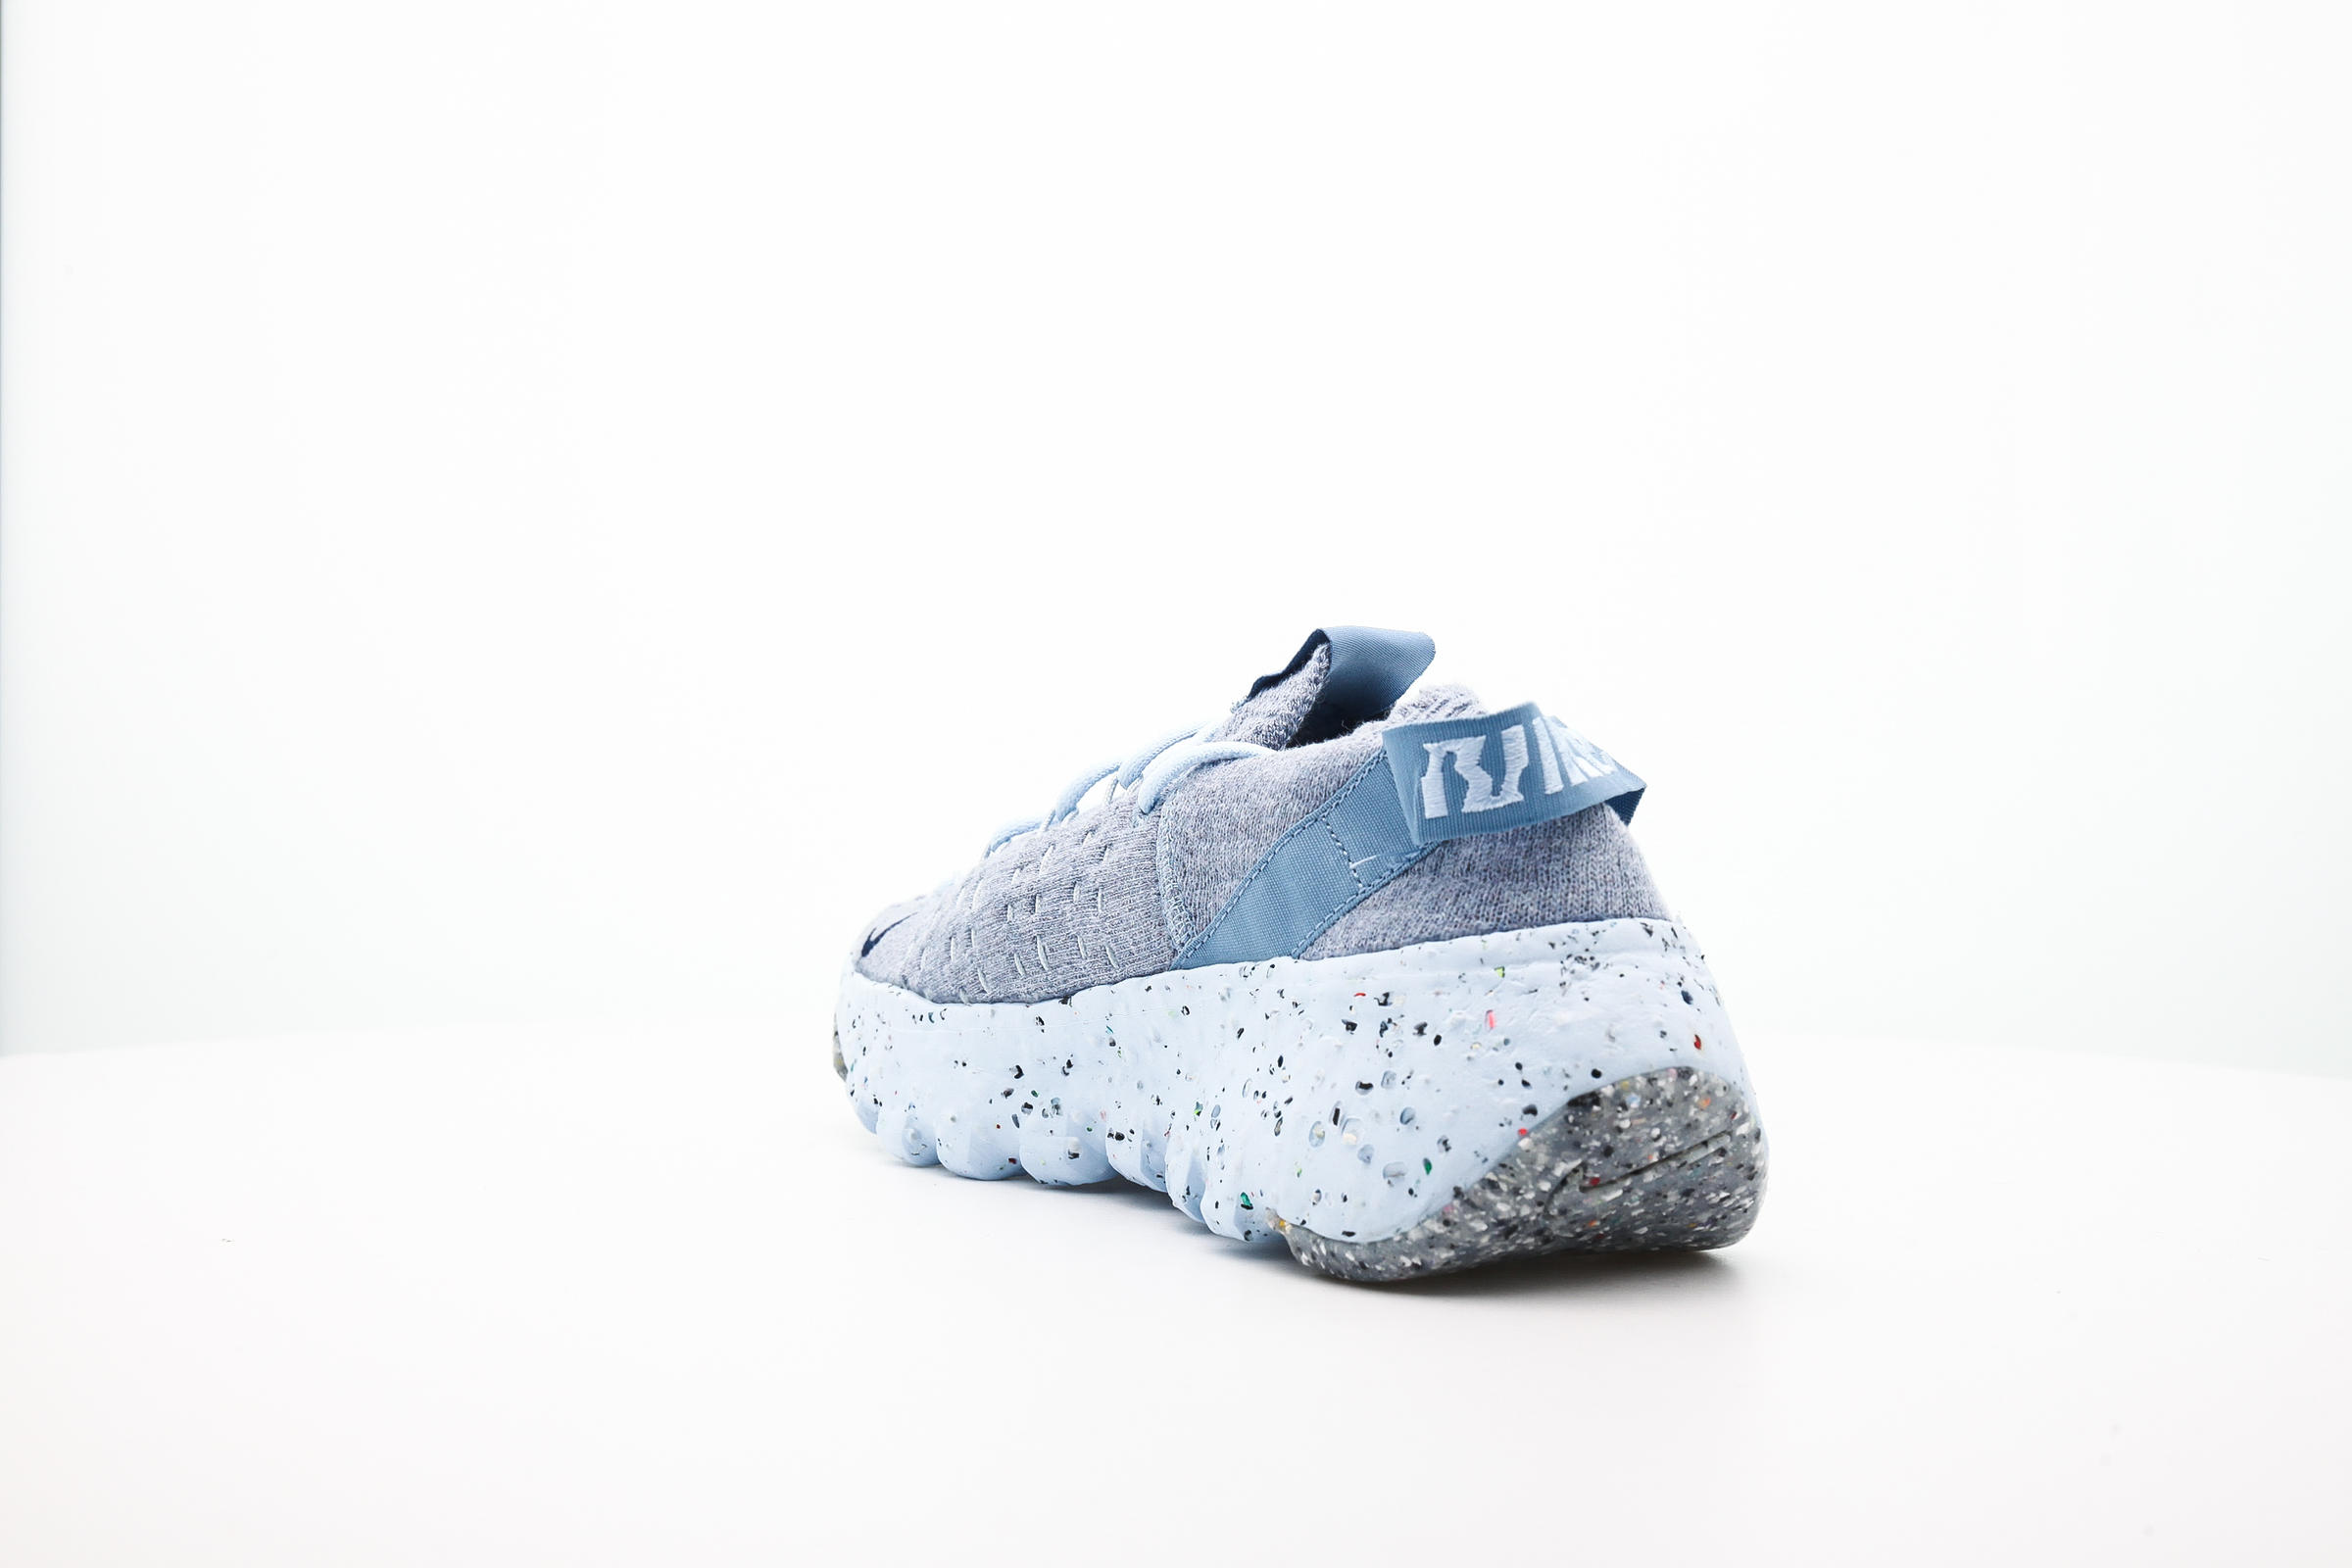 Nike WMNS SPACE HIPPIE 04 "CHAMBRAY BLUE"